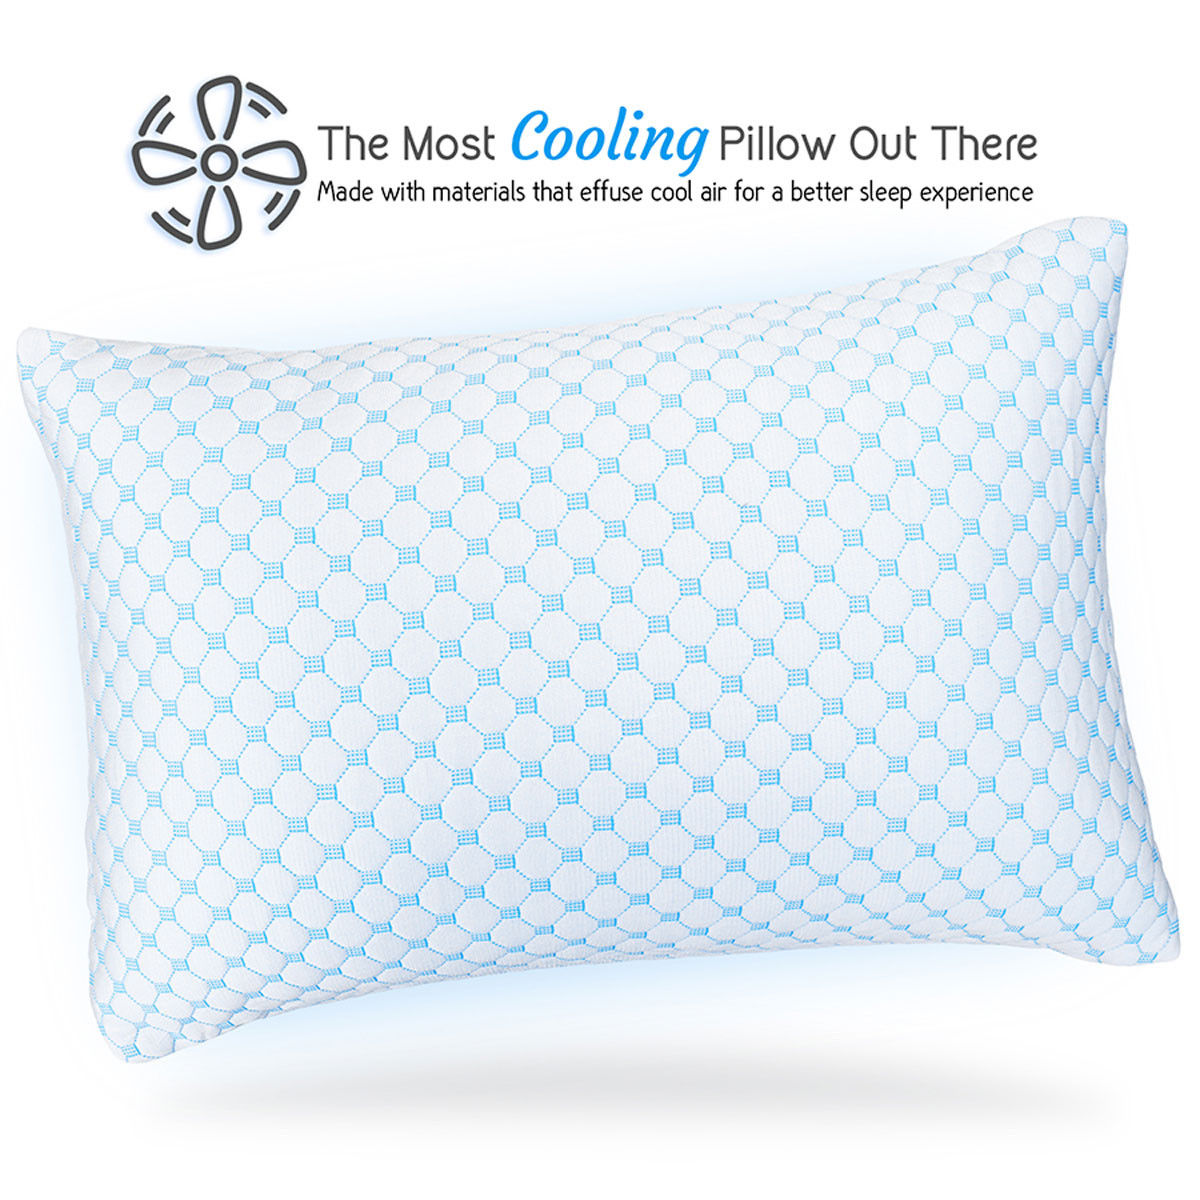 What are the features of the Clara Clark Reversible Cooling Pillow?